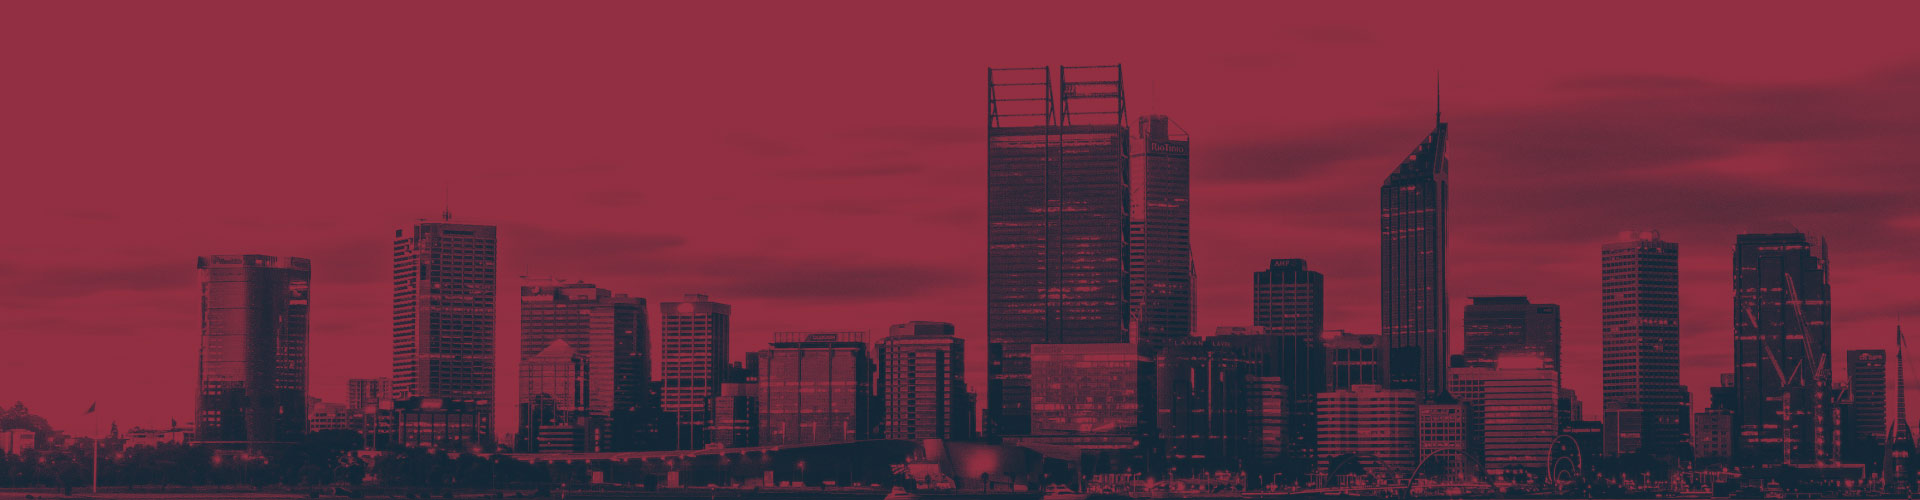 Perth Skyline stylised in red